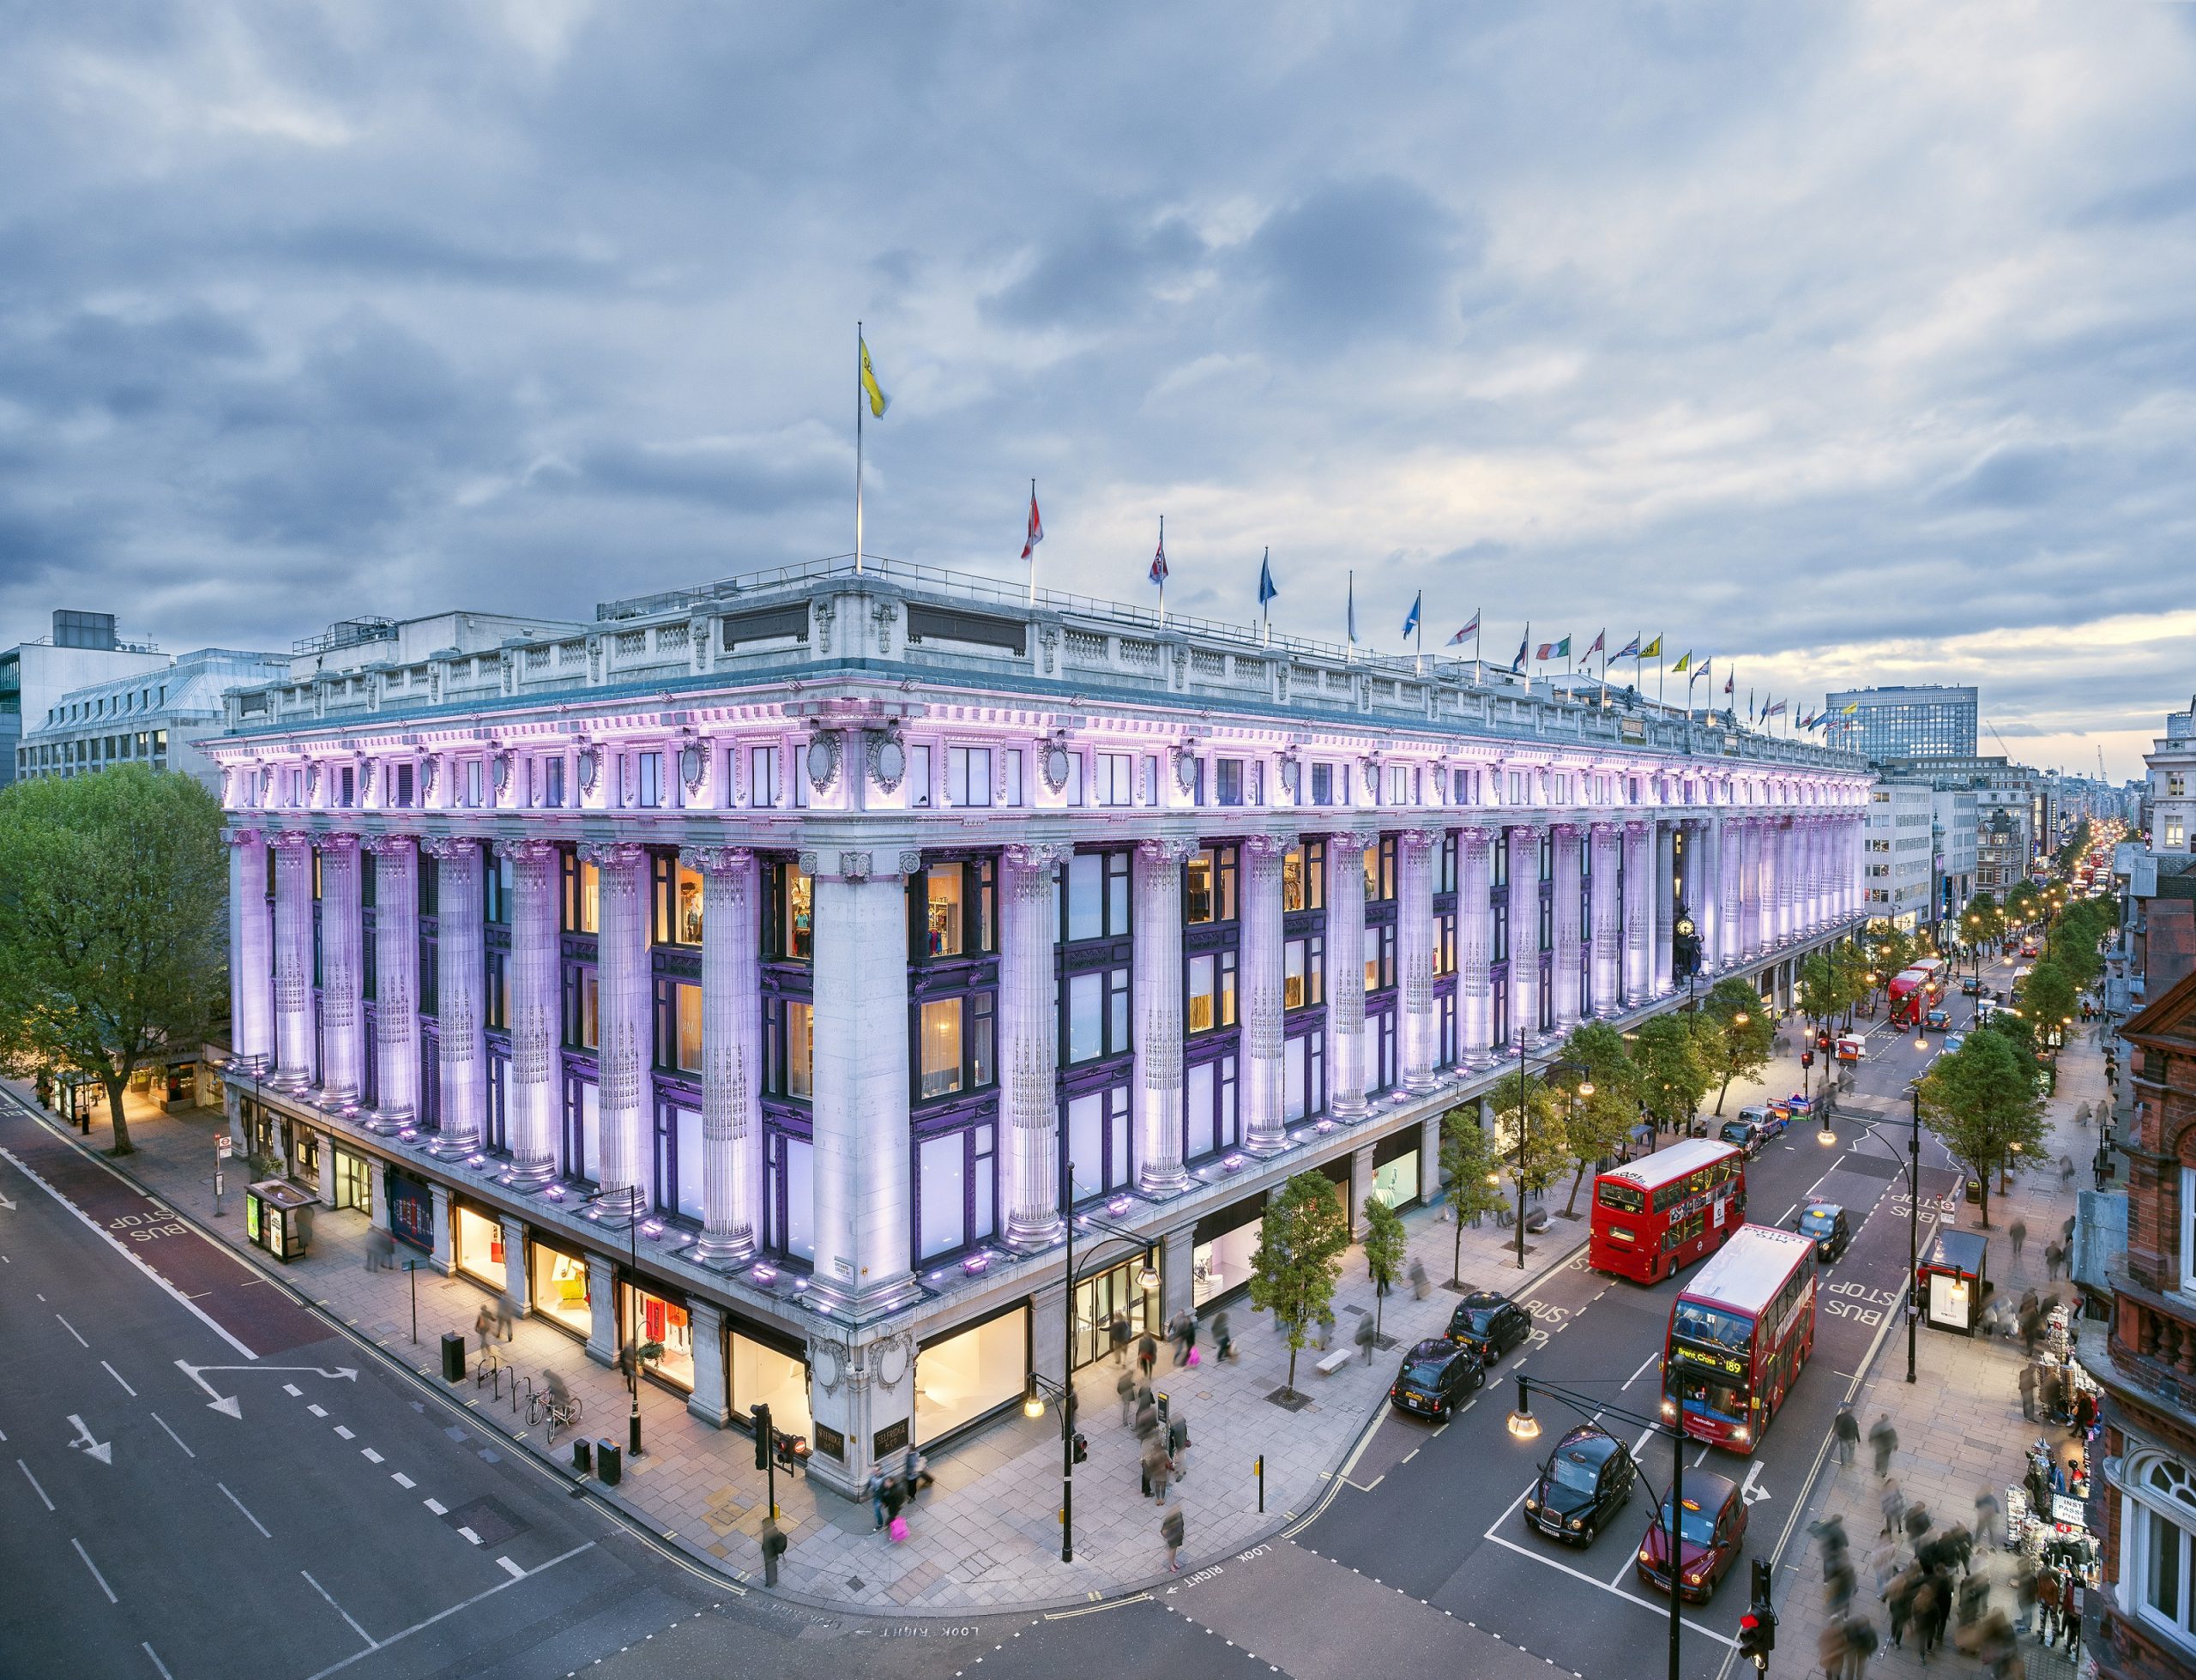 Following the Selfridges sale, UK department stores are prioritizing